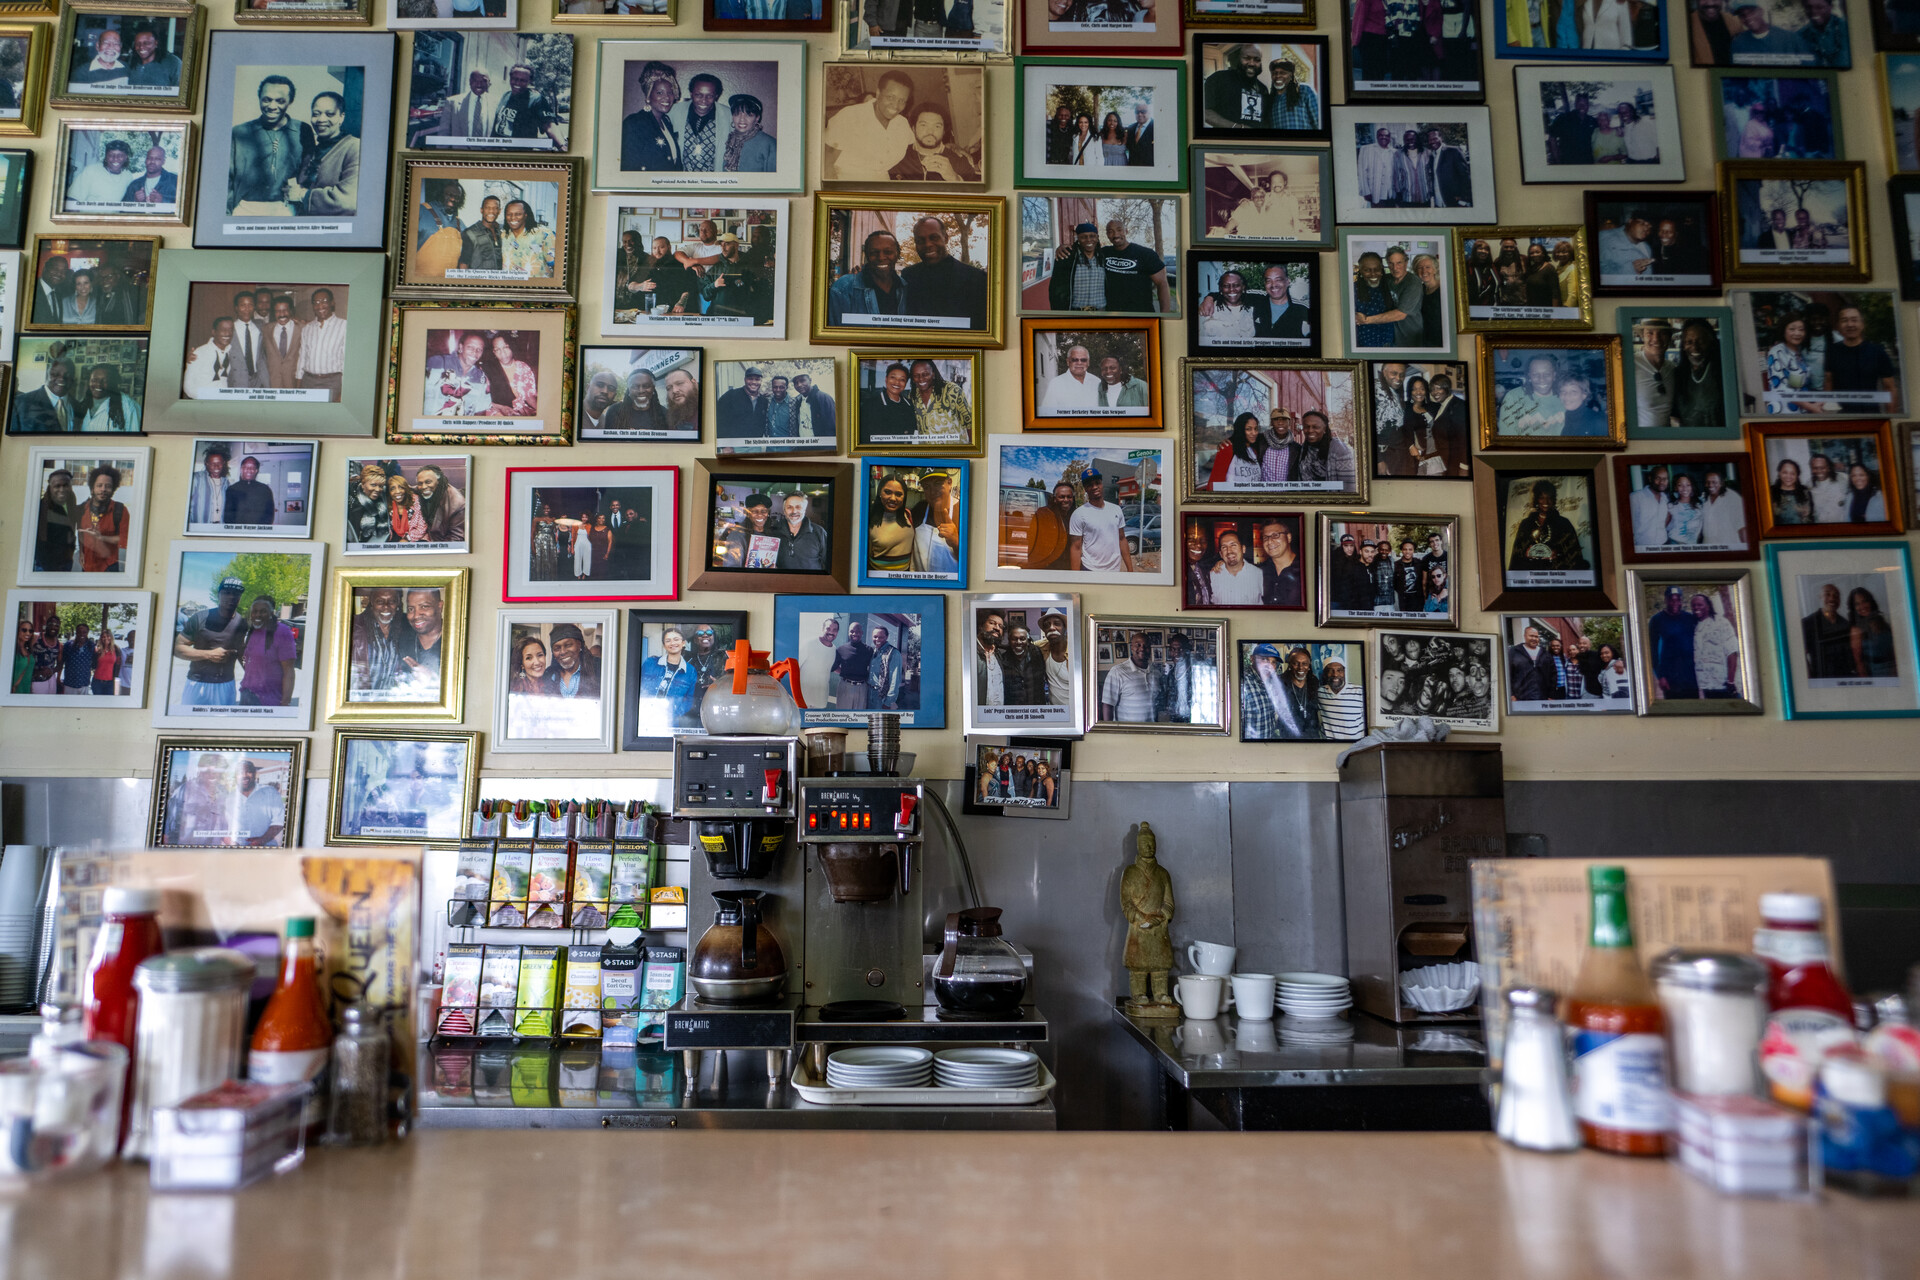 A close up of a diner counter with hot sauce bottles, glass sugar containers, salt and pepper shakers, packets of jelly and plastic bottles of ketchup neatly arranged. In the background, a large collage of individually framed photos decorate the wall leaving no room between each frame. In the center, coffee pots warm on the coffee station.